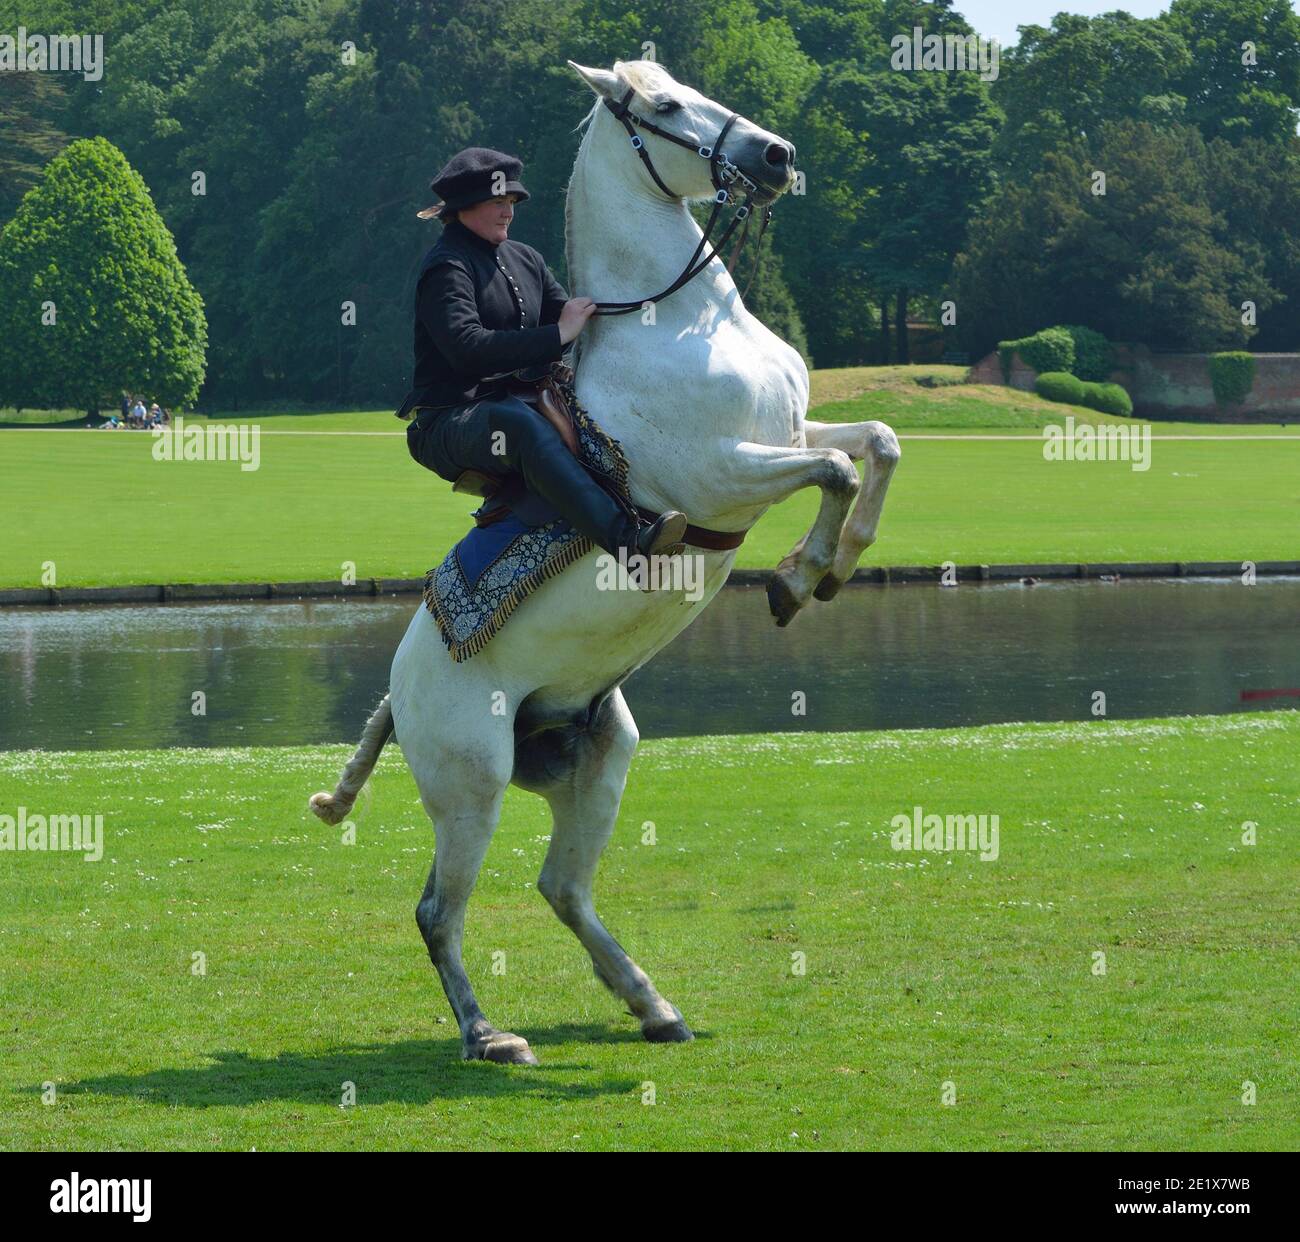 White horse rearing up with rider in Elizabethan costume. Stock Photo